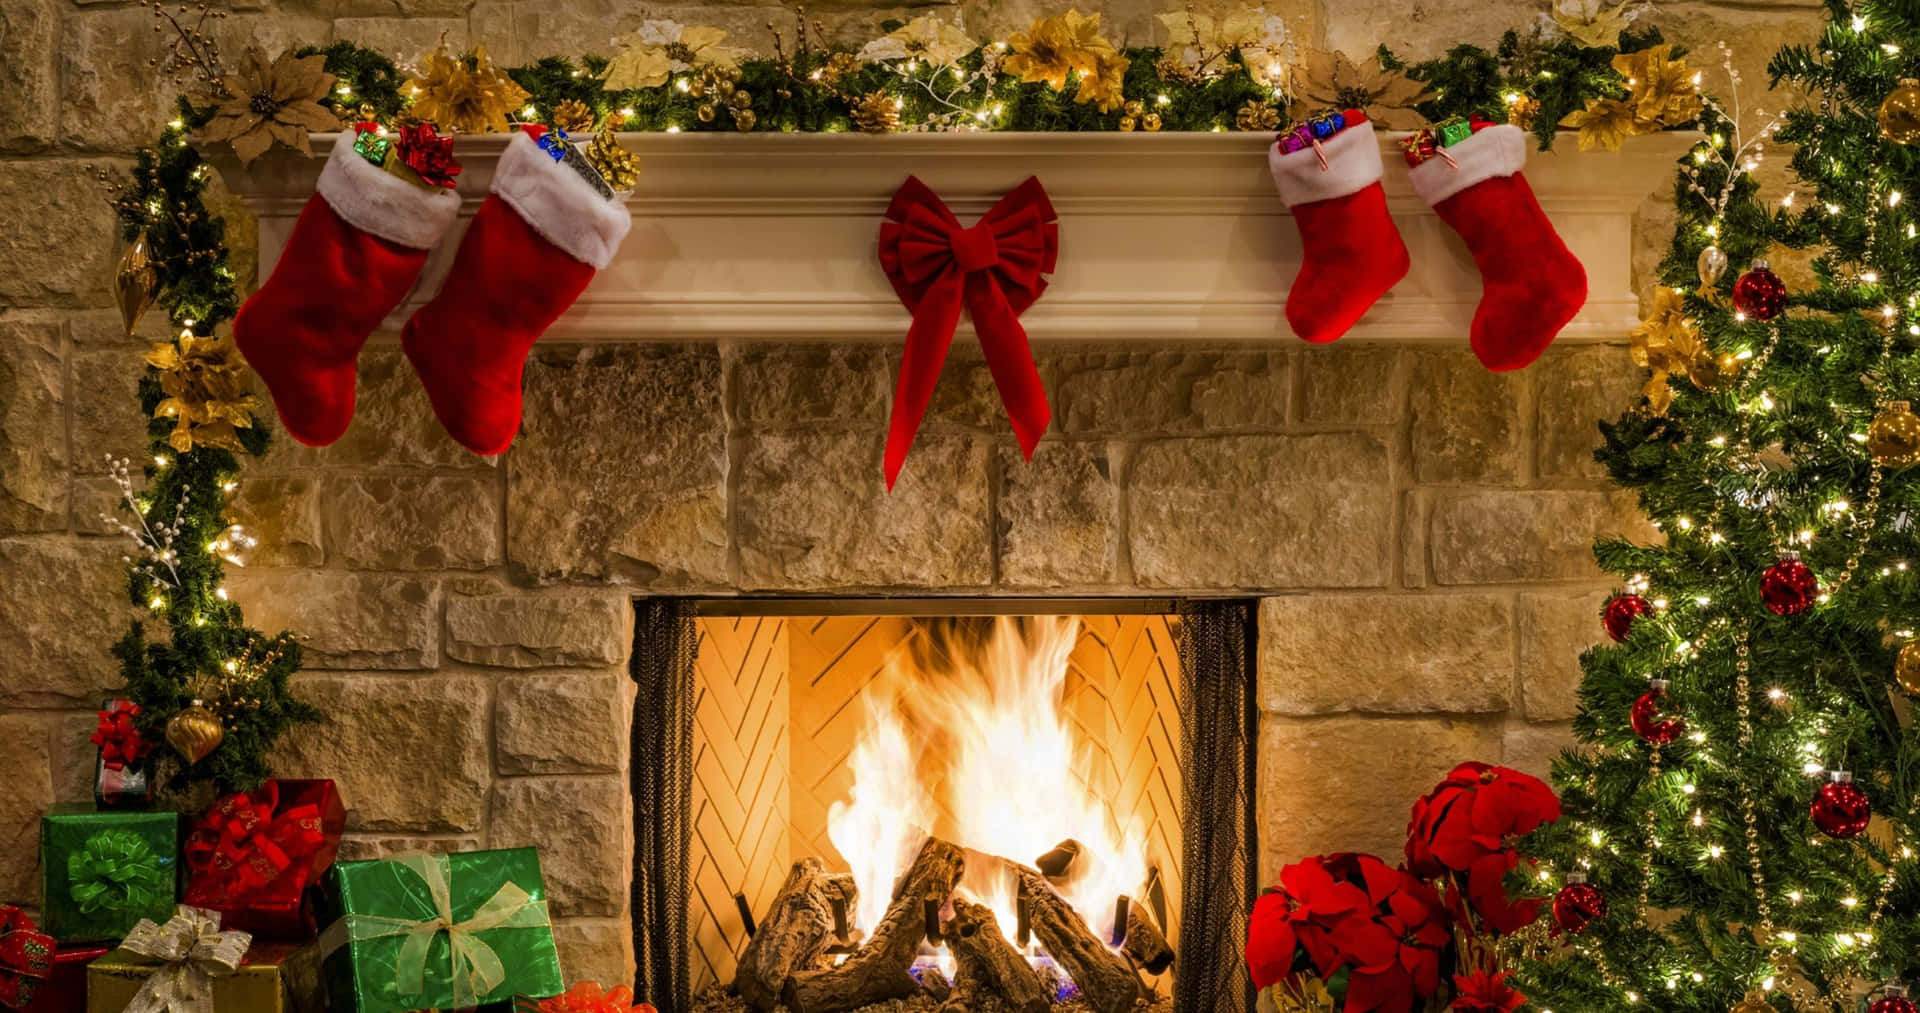 Christmas Fireplace With Stockings And Presents